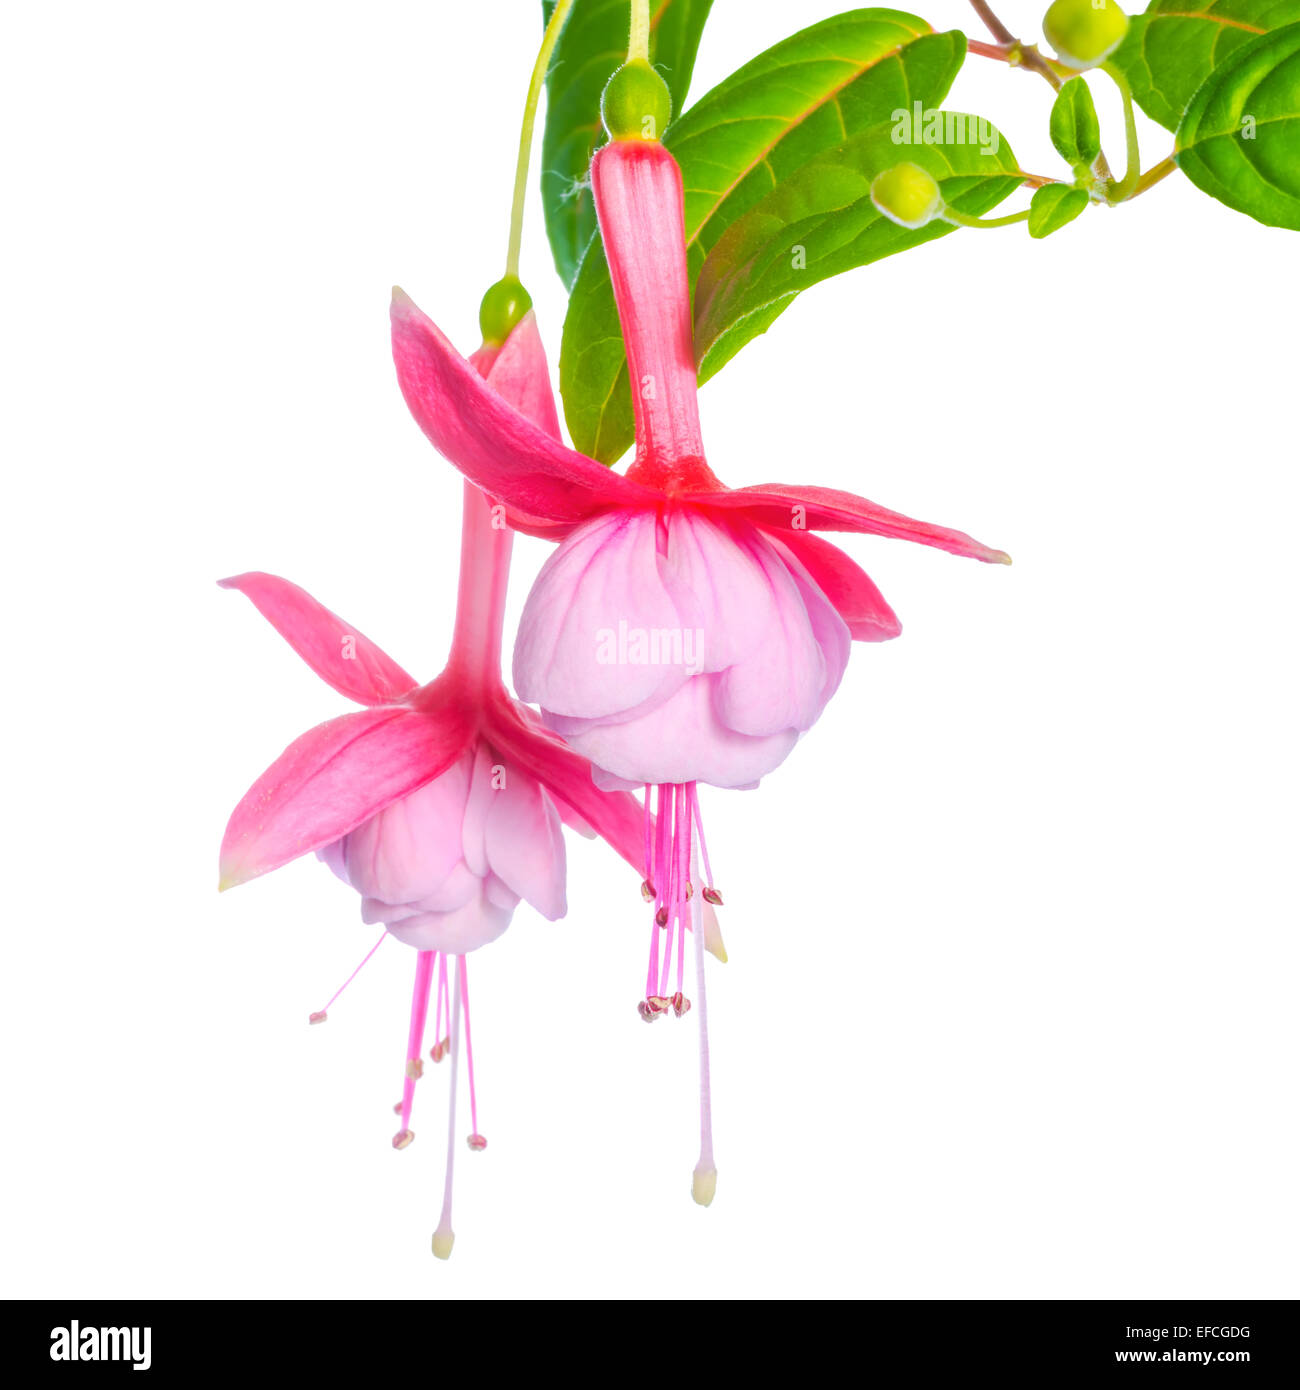 delicate pink fuchsia of an unusual form is isolated on the white backgroud,  `Luuk van Riet` Stock Photo